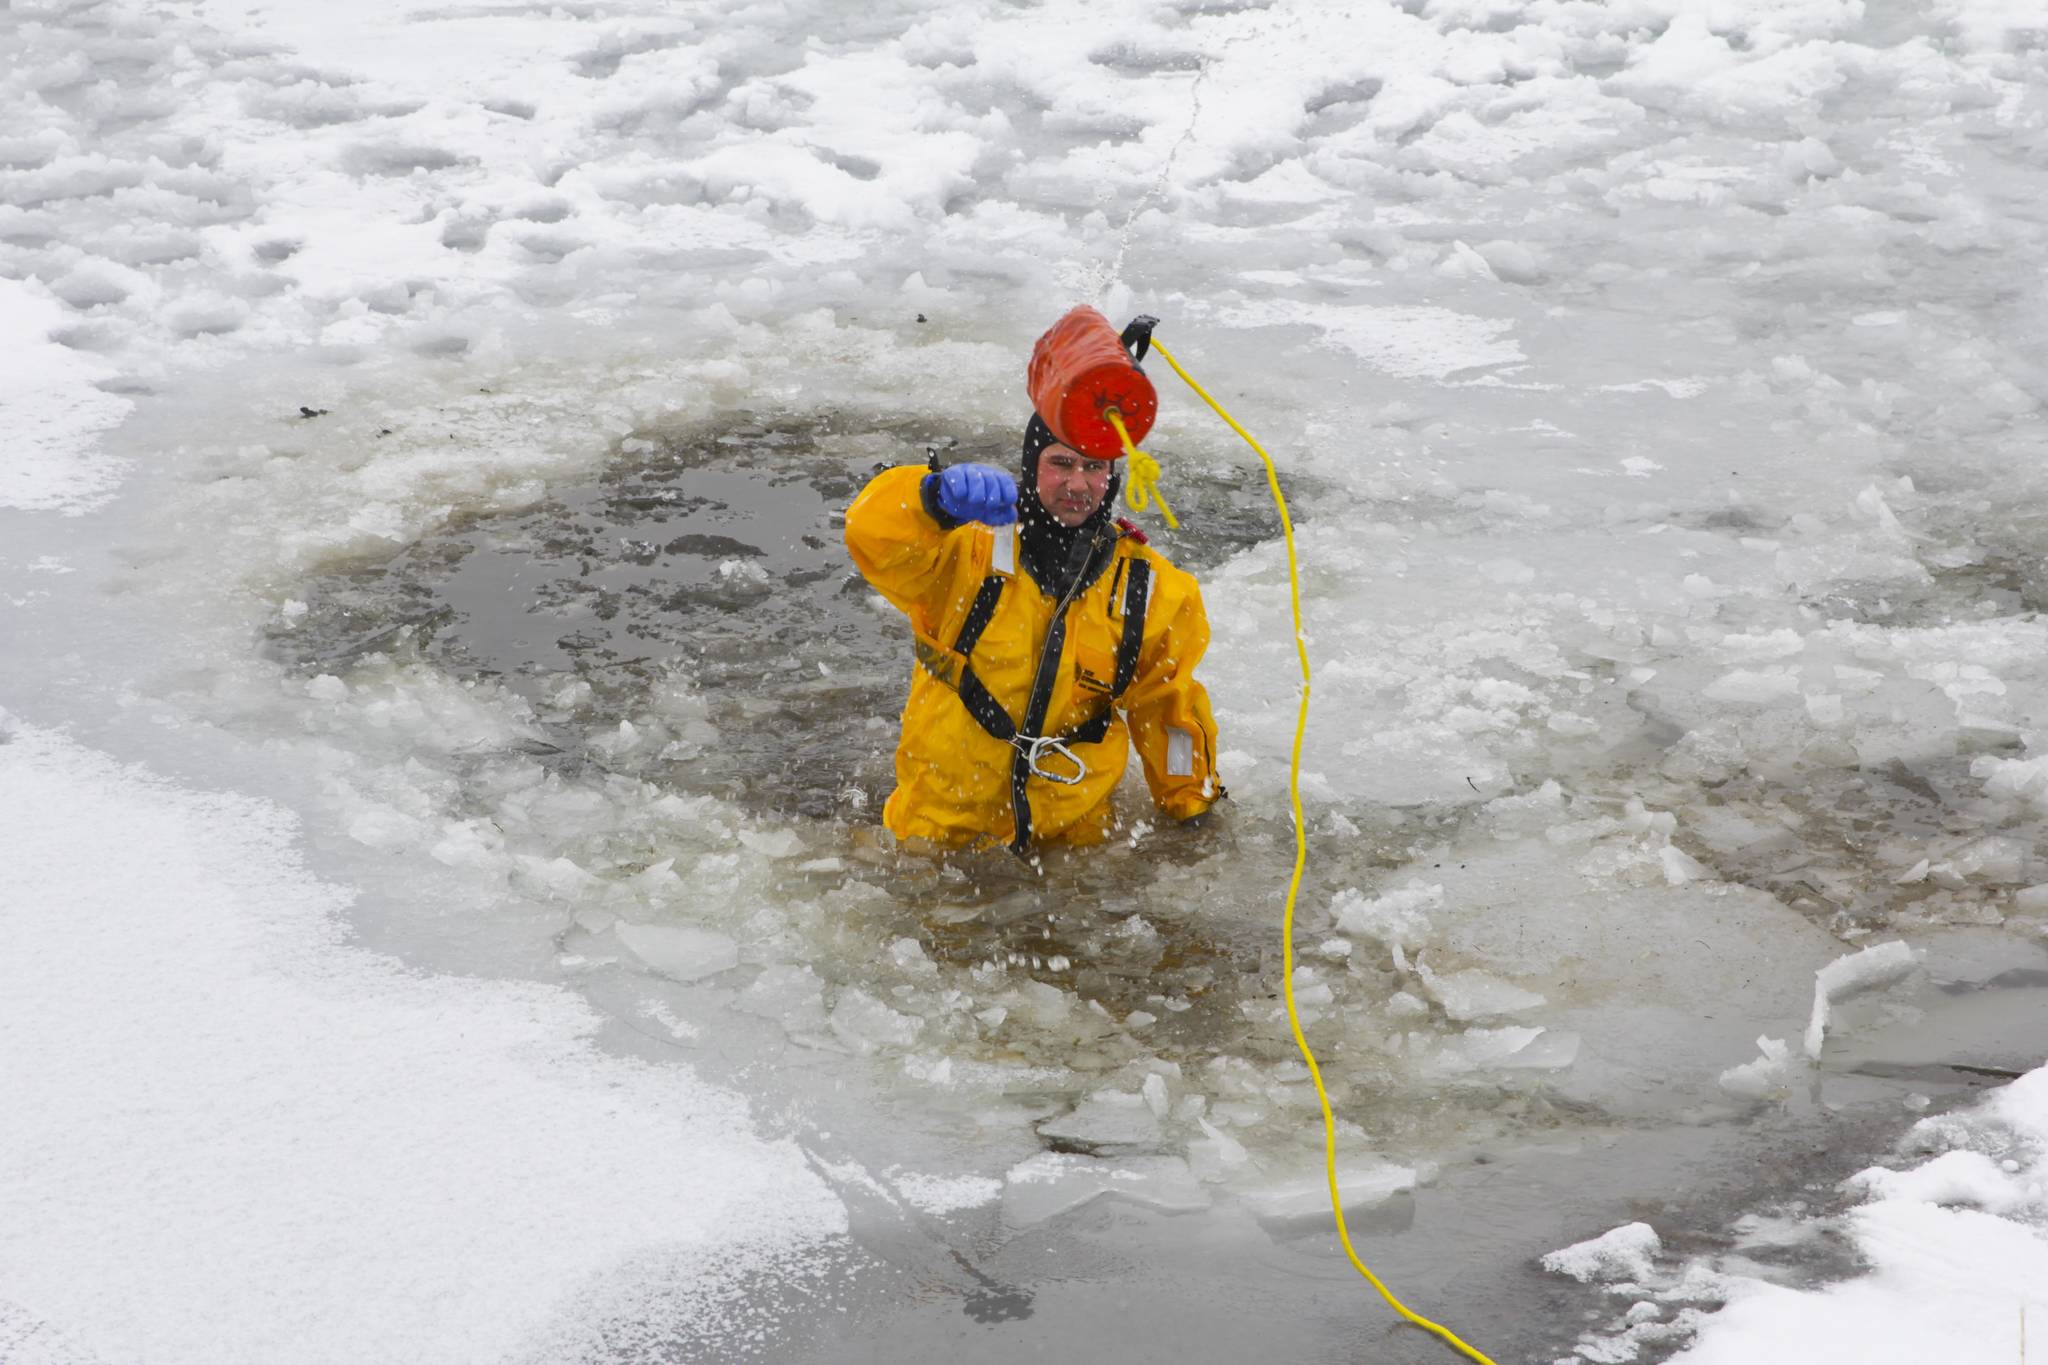 Capt. Jayme Johns, head of the Capital City Fire/Rescue’s water rescue team, chucks a rope bag back to shore during CCFR’s annual ice rescue training at Twin Lakes on April 7, 2021. (Michael S. Lockett / Juneau Empire)